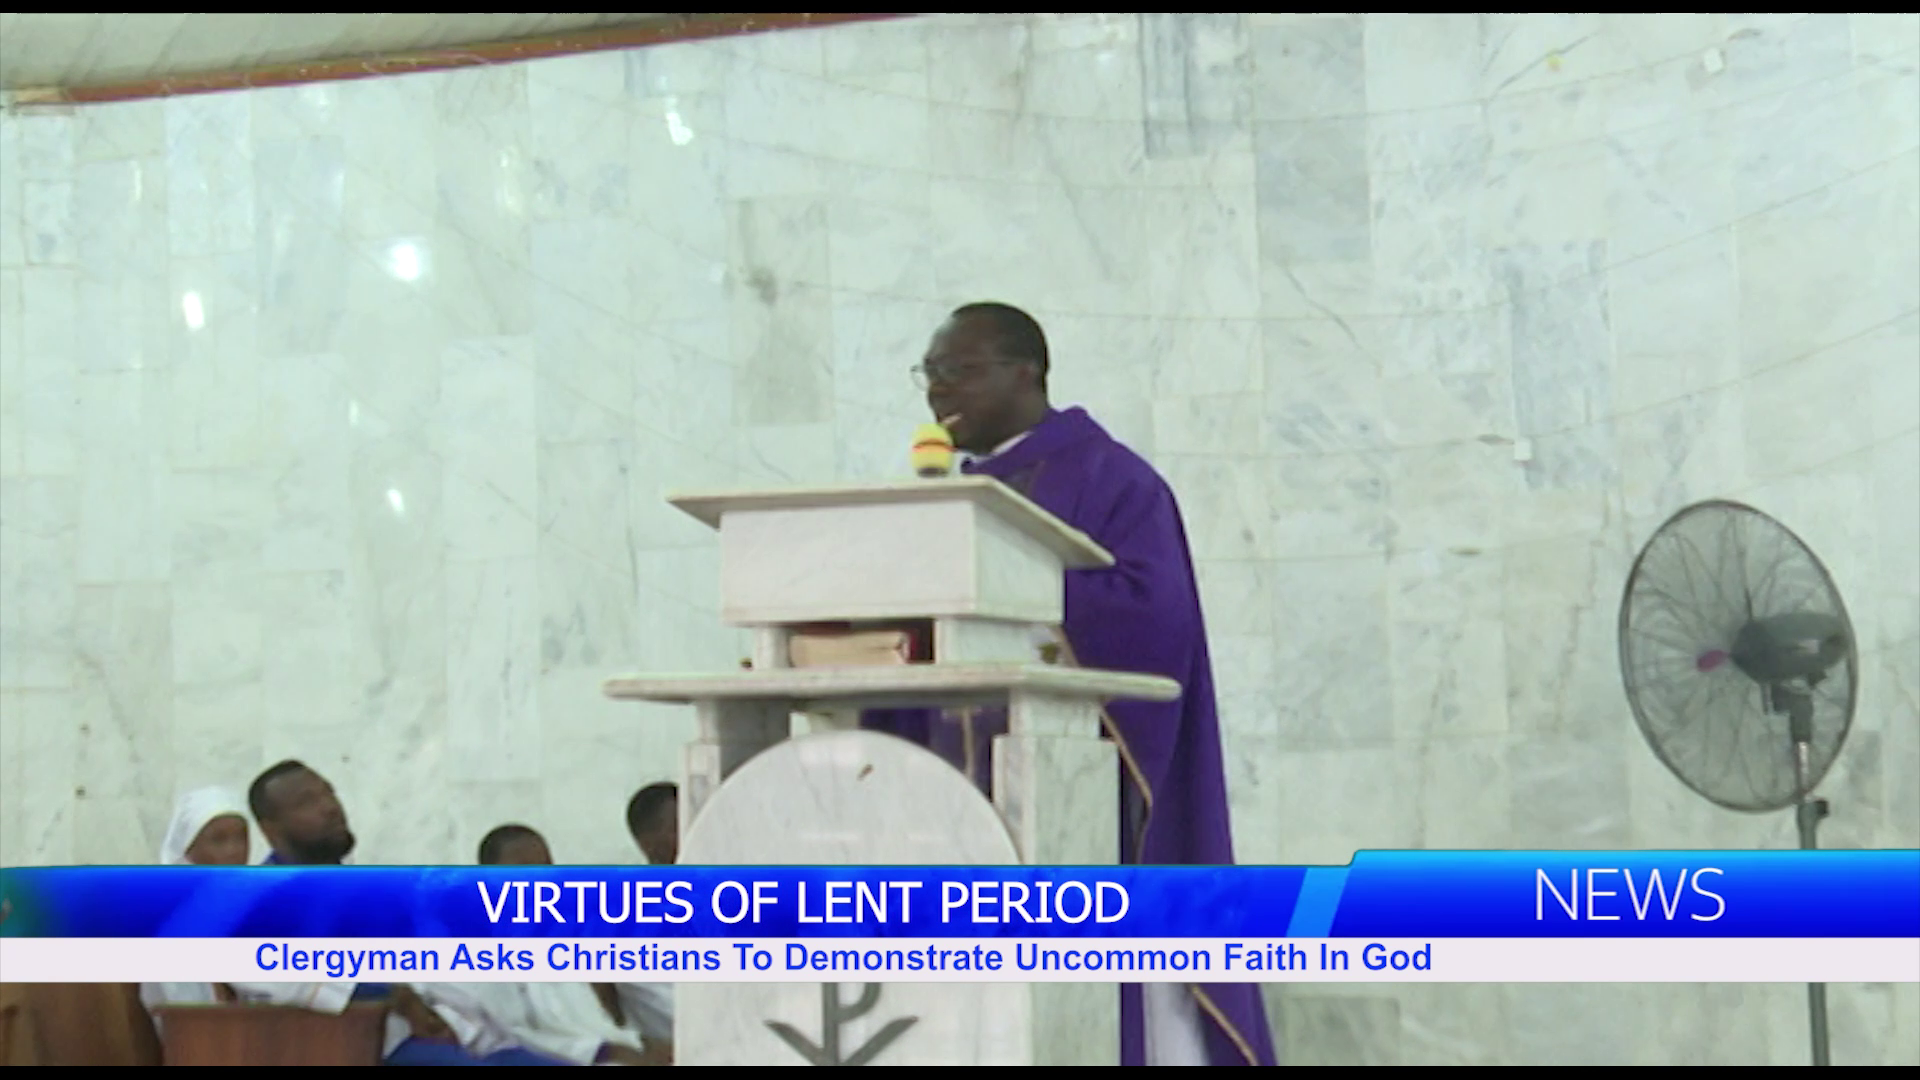 Clergyman Asks Christians To Demonstrate Uncommon Faith In God